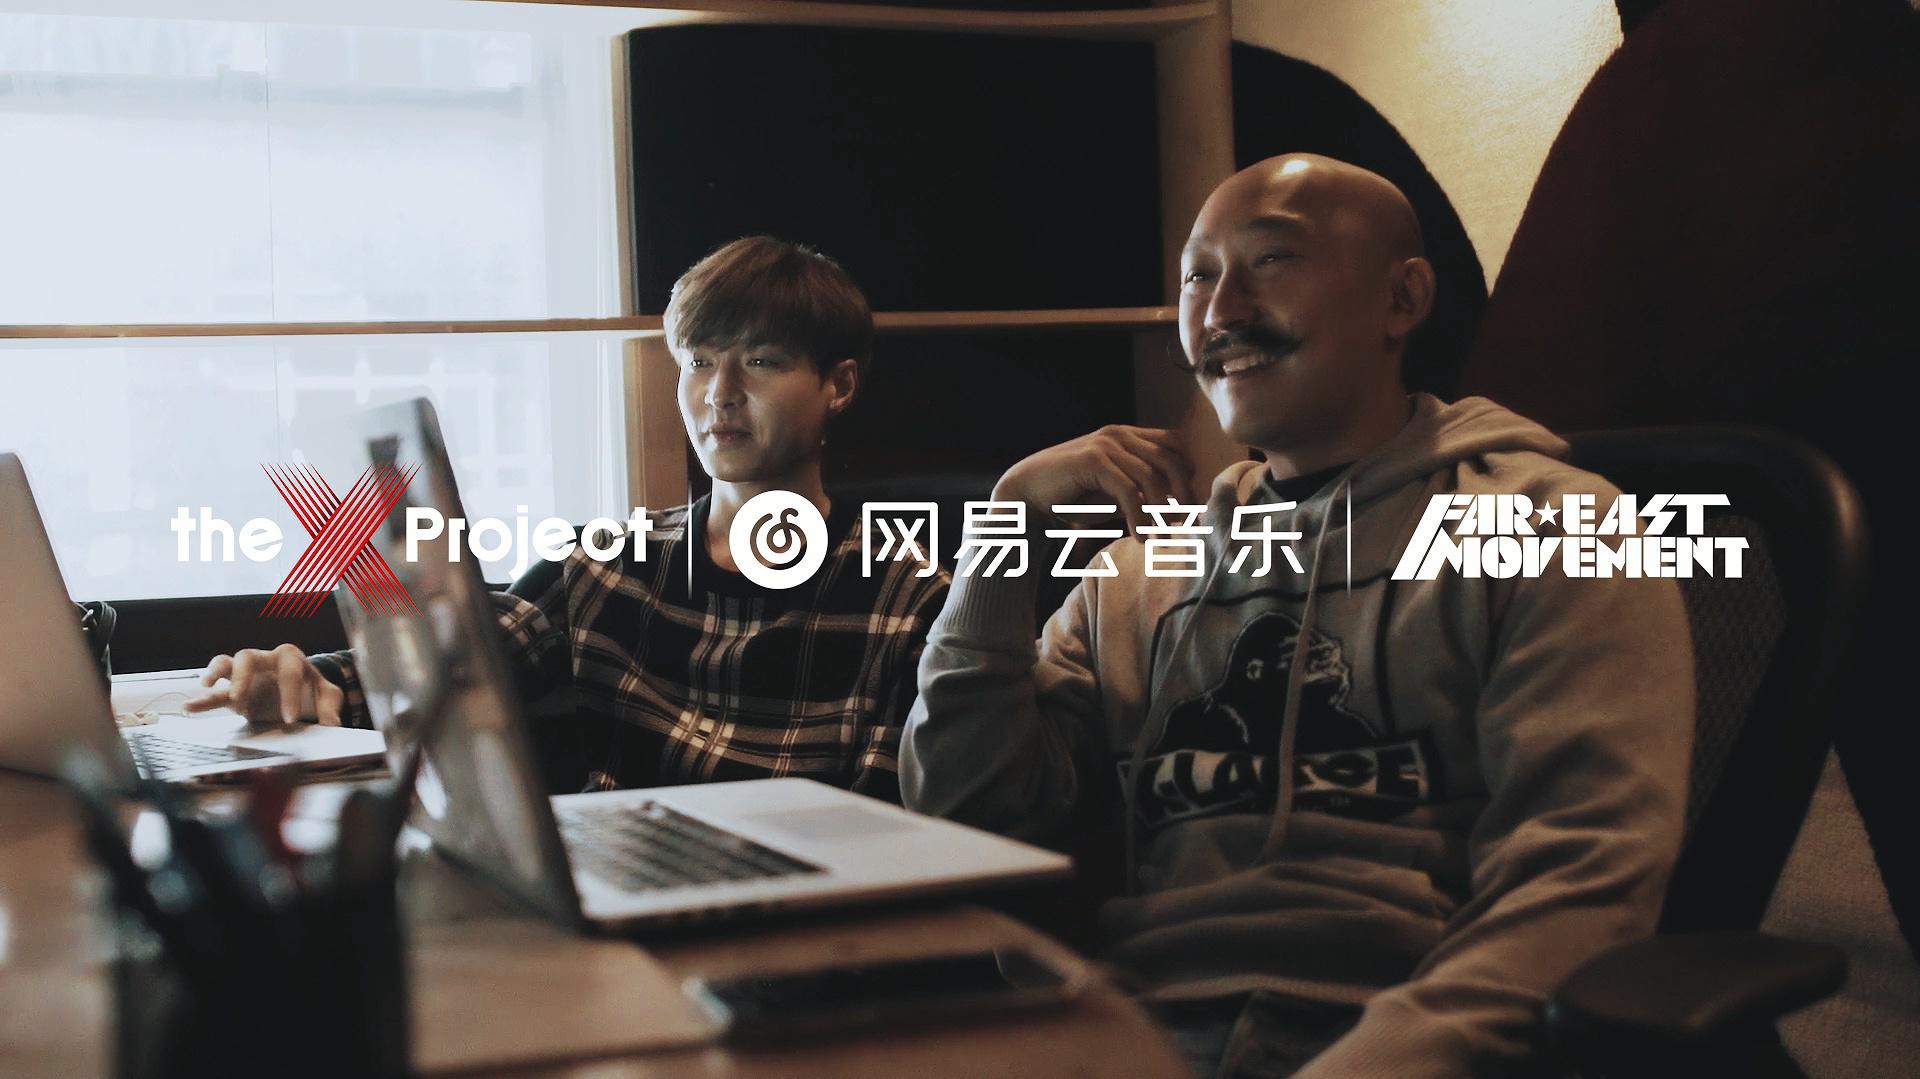 Far East Movement - the X Project 远东韵律/张艺兴宣传片